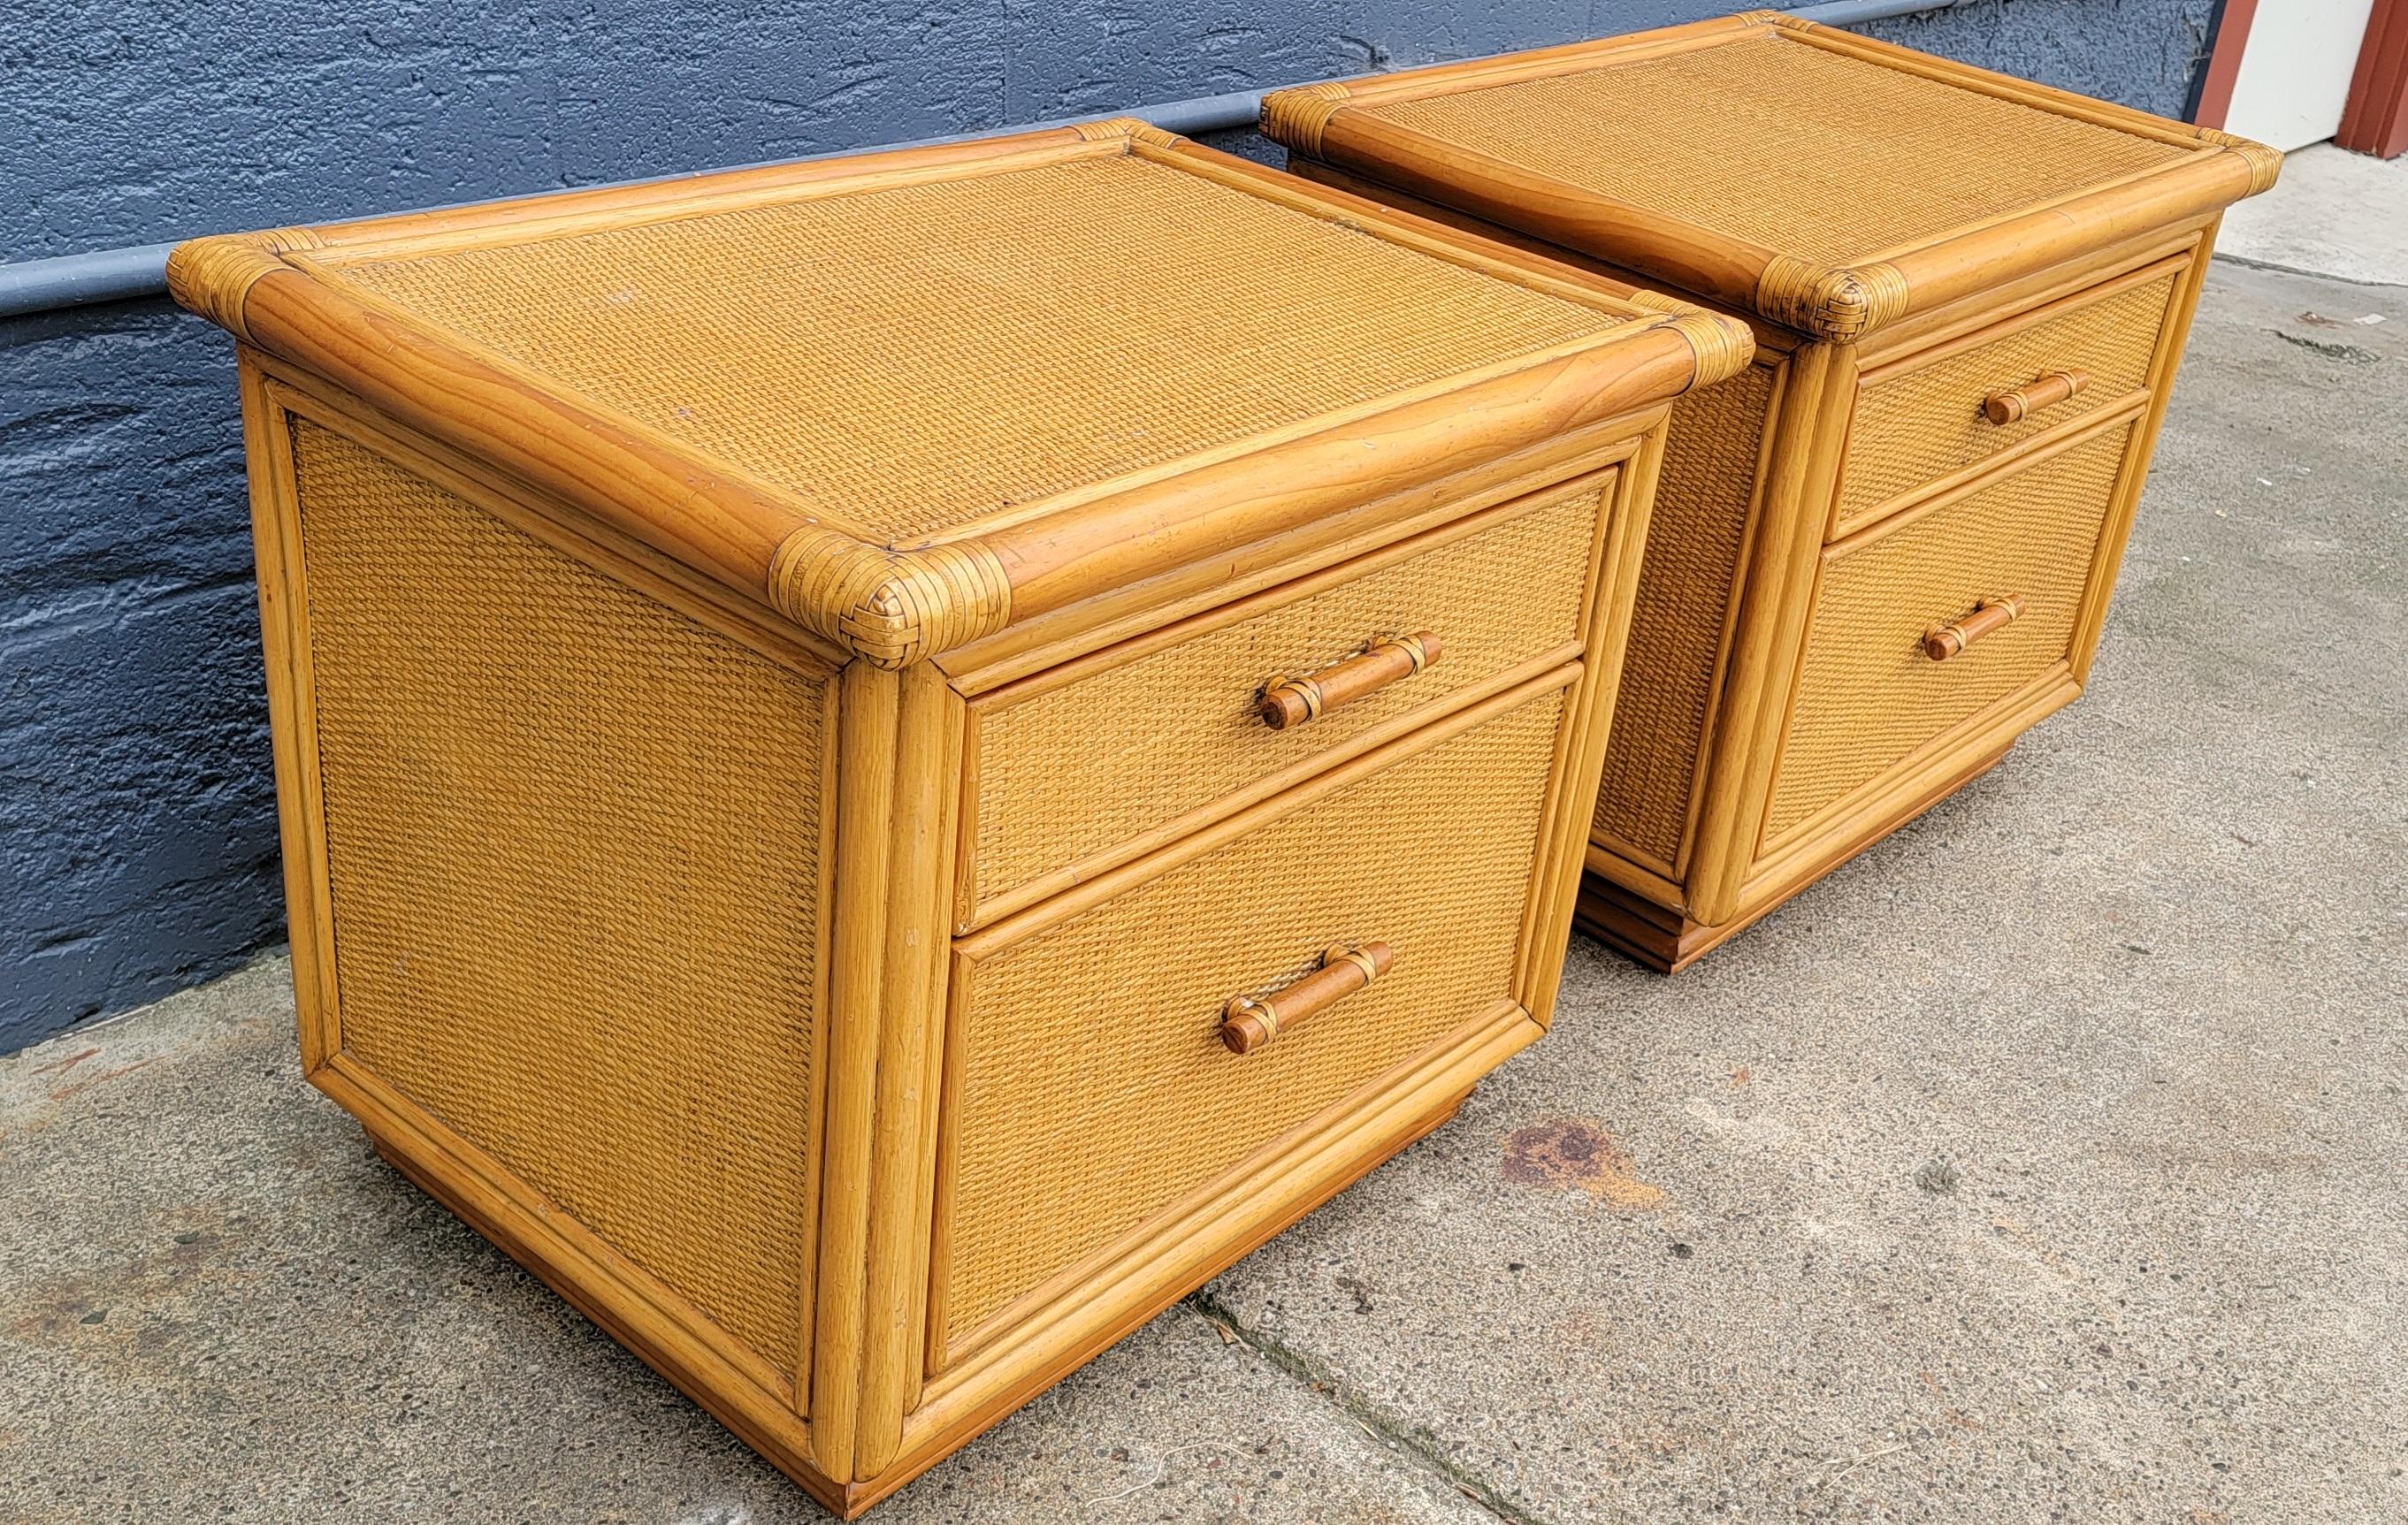 A pair of bamboo and wicker / rattan organic modern end tables or nightstands. Circa. 1970's. Each cabinet has 2 drawers with steel glides that function effortlessly. Very good original vintage condition with light wear / patina from use and history.